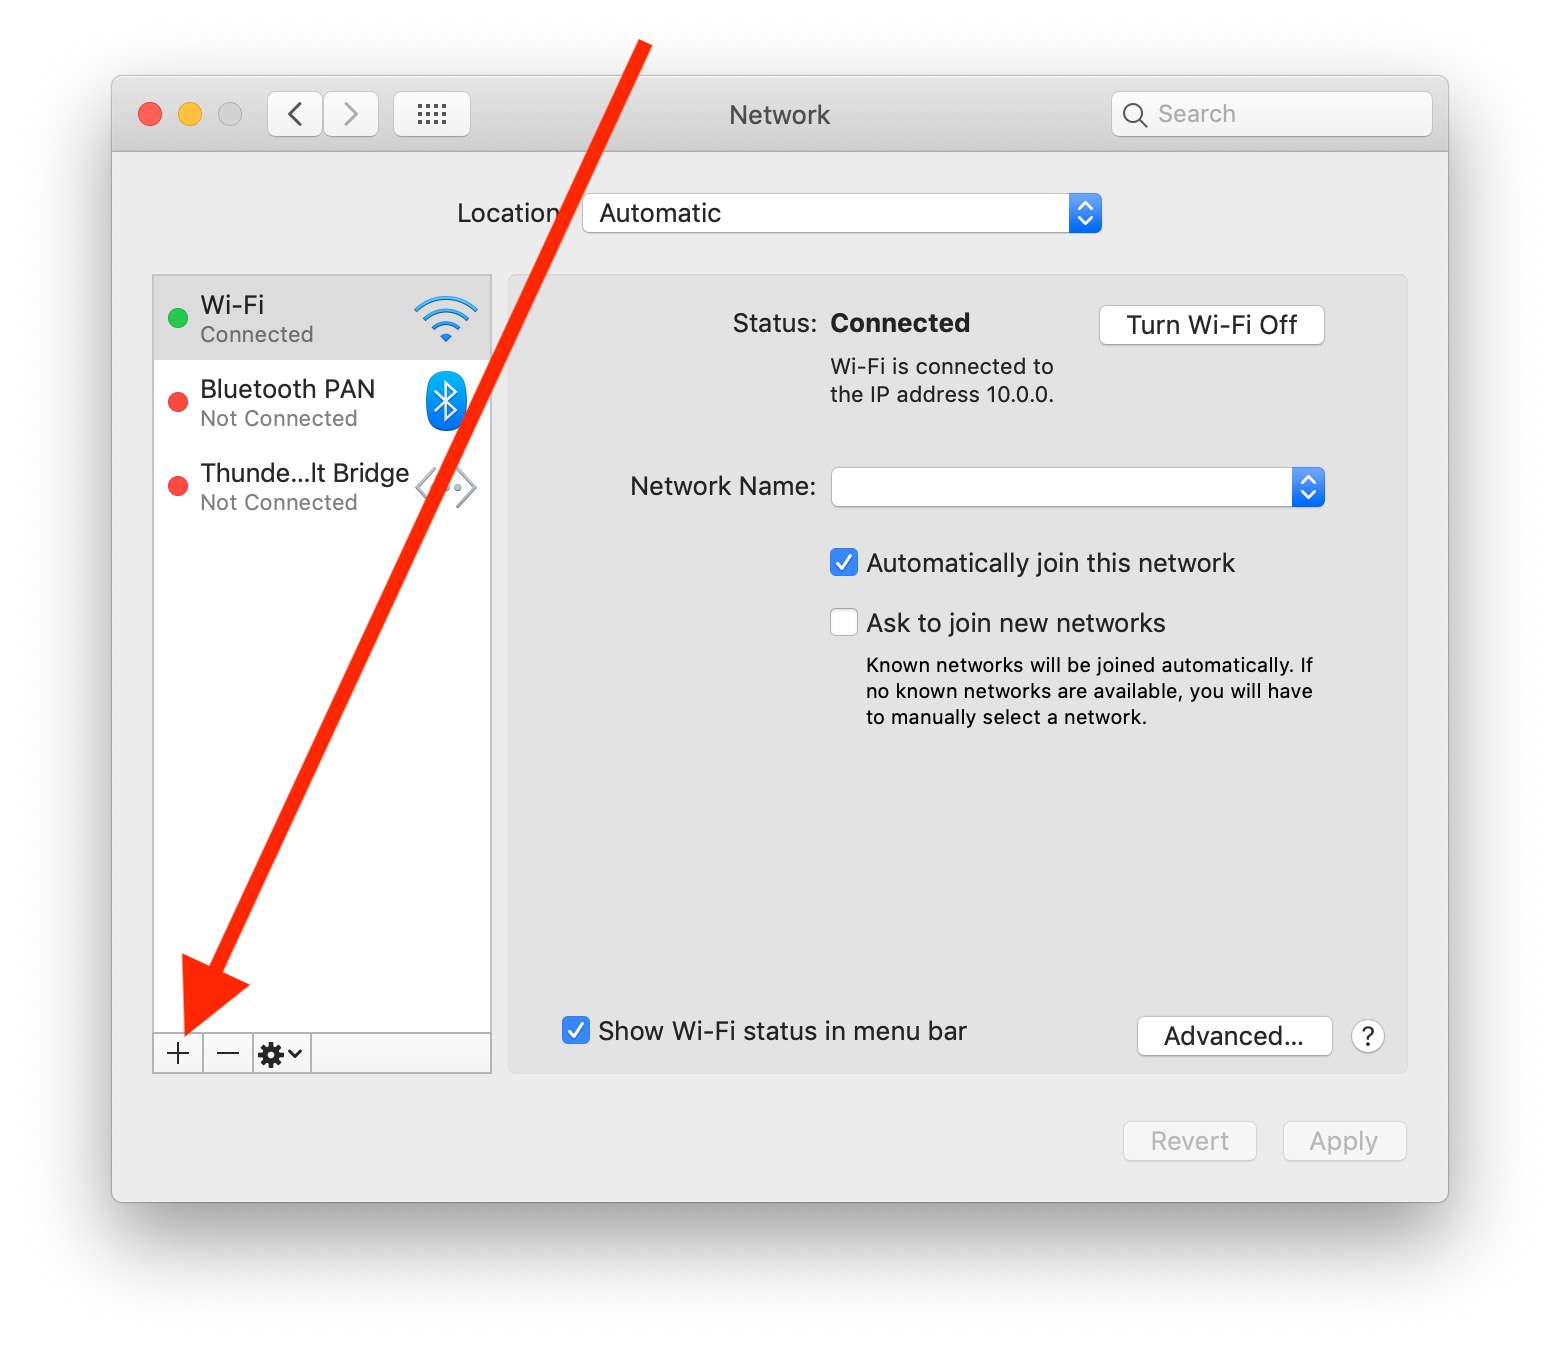 how to get a uk vpn on mac